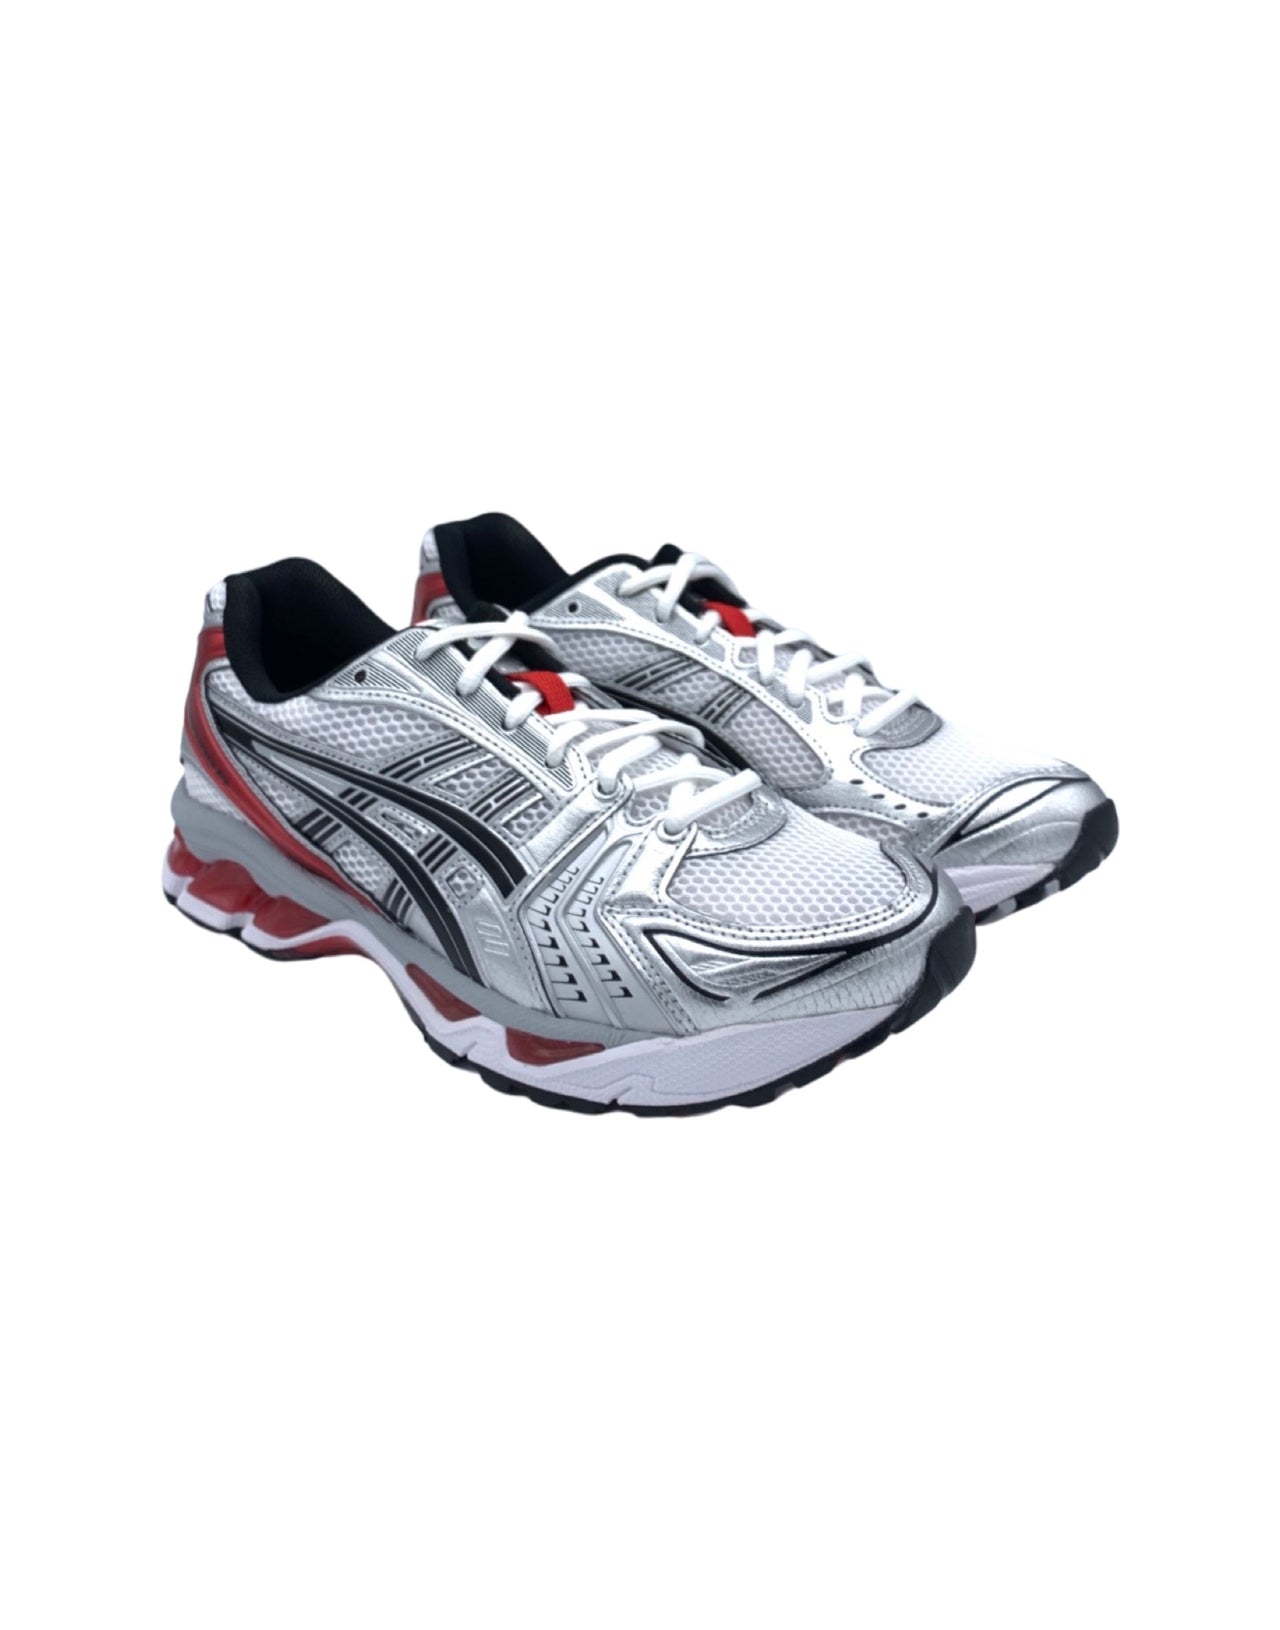 ASICS Gel-Kayano 14 1201A019-103 WHITE/CLASSIC RED